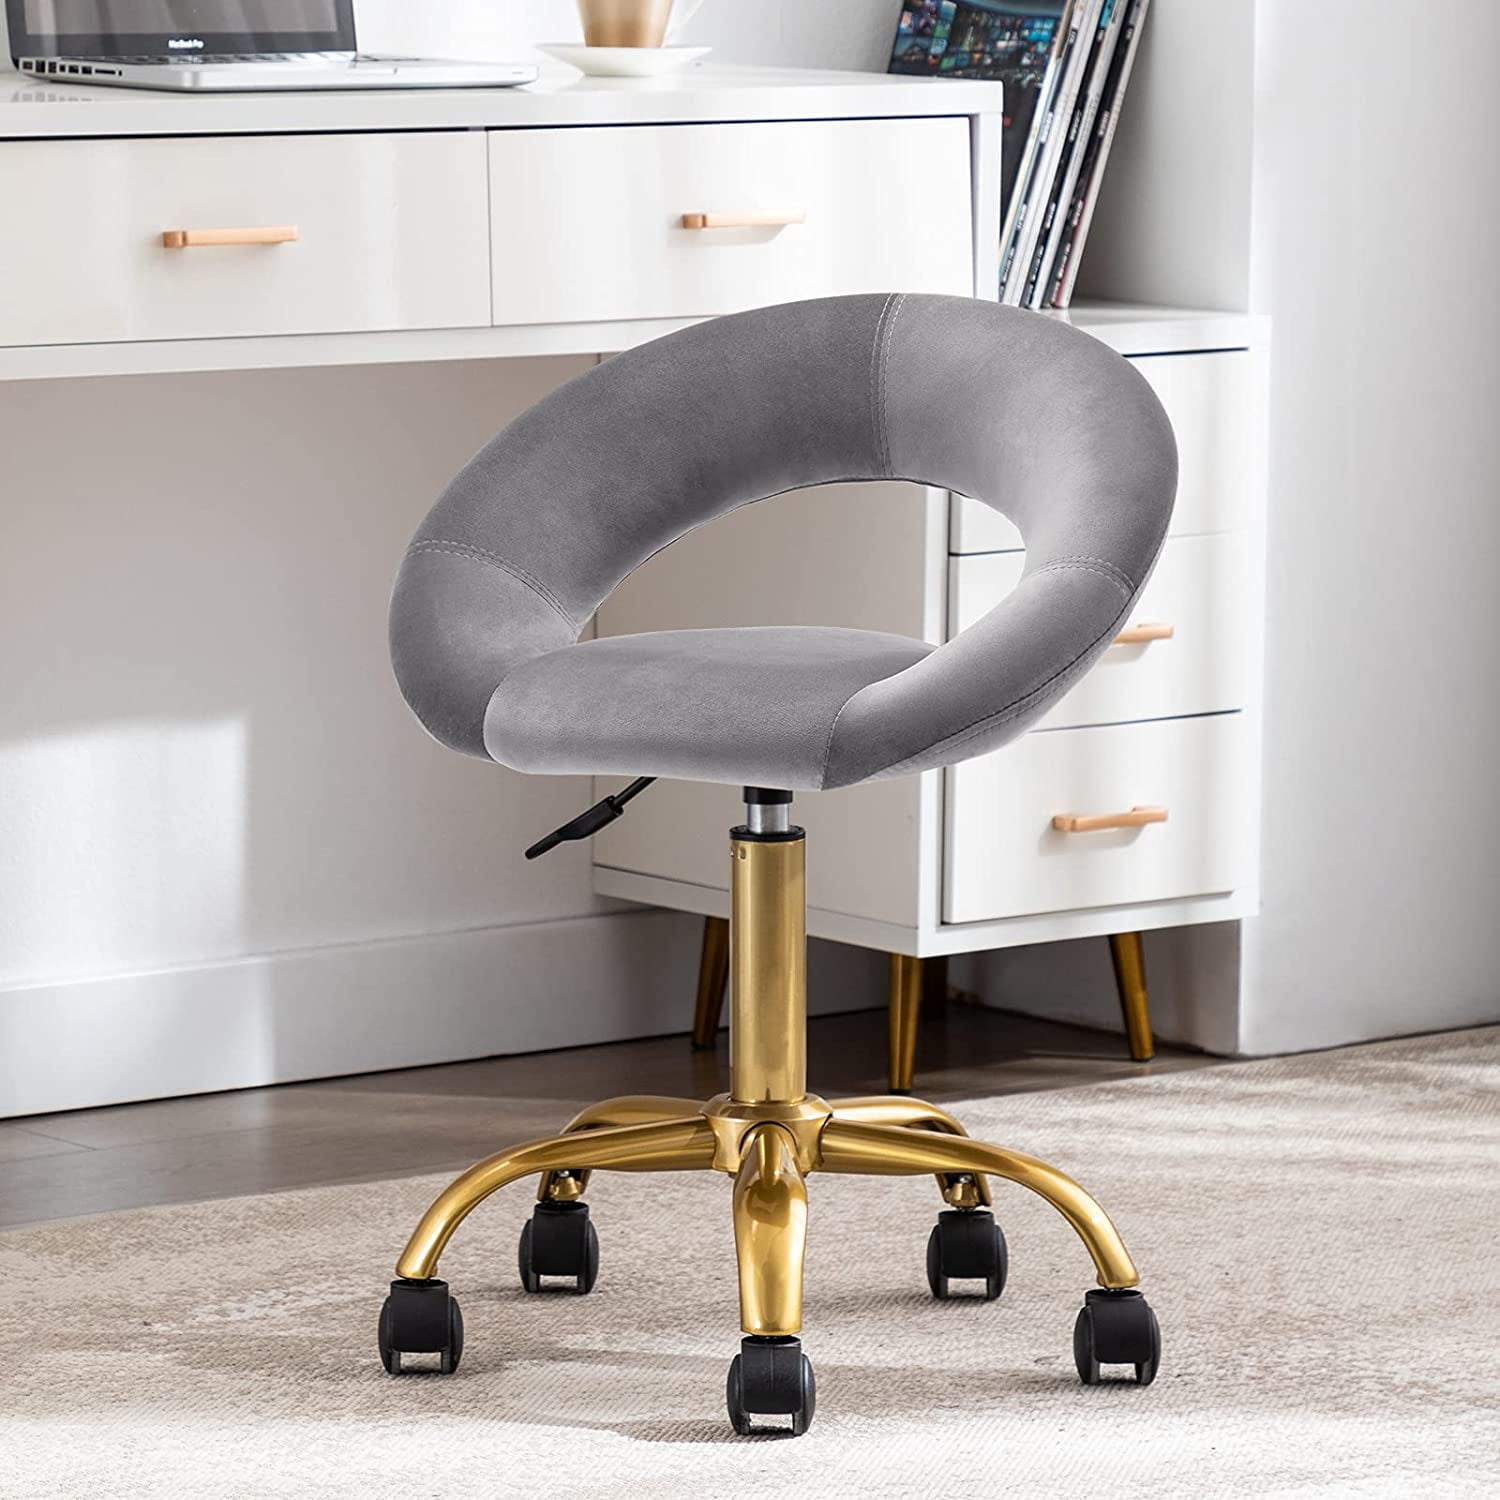 Duhome Velvet Vanity Chair with Wheels, Makeup Vanity Stool with